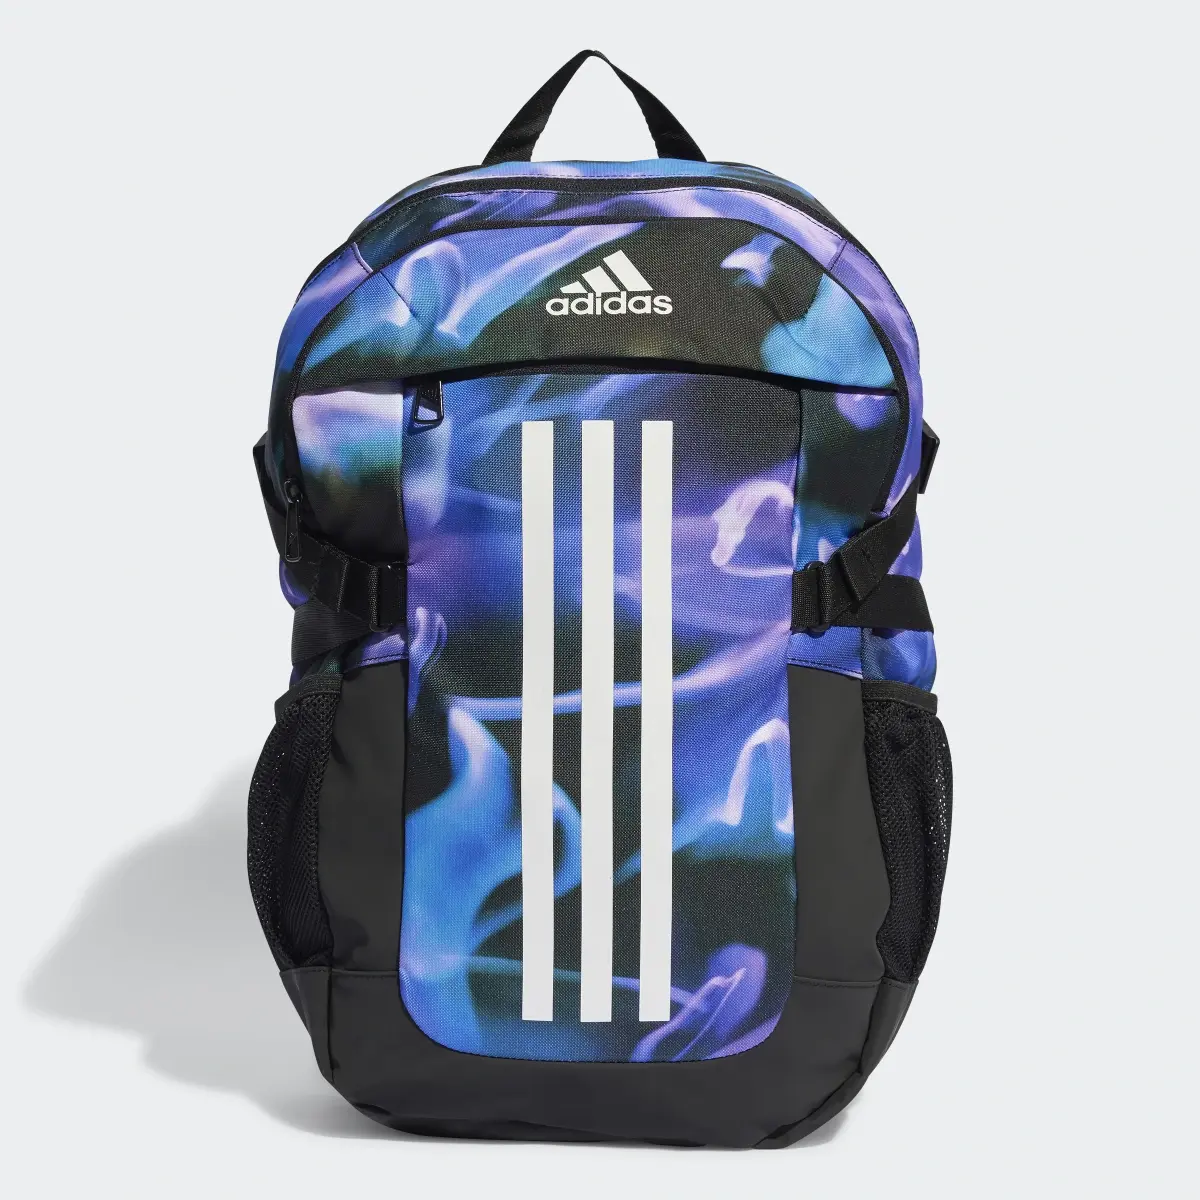 Adidas Power VI Graphic Backpack. 1